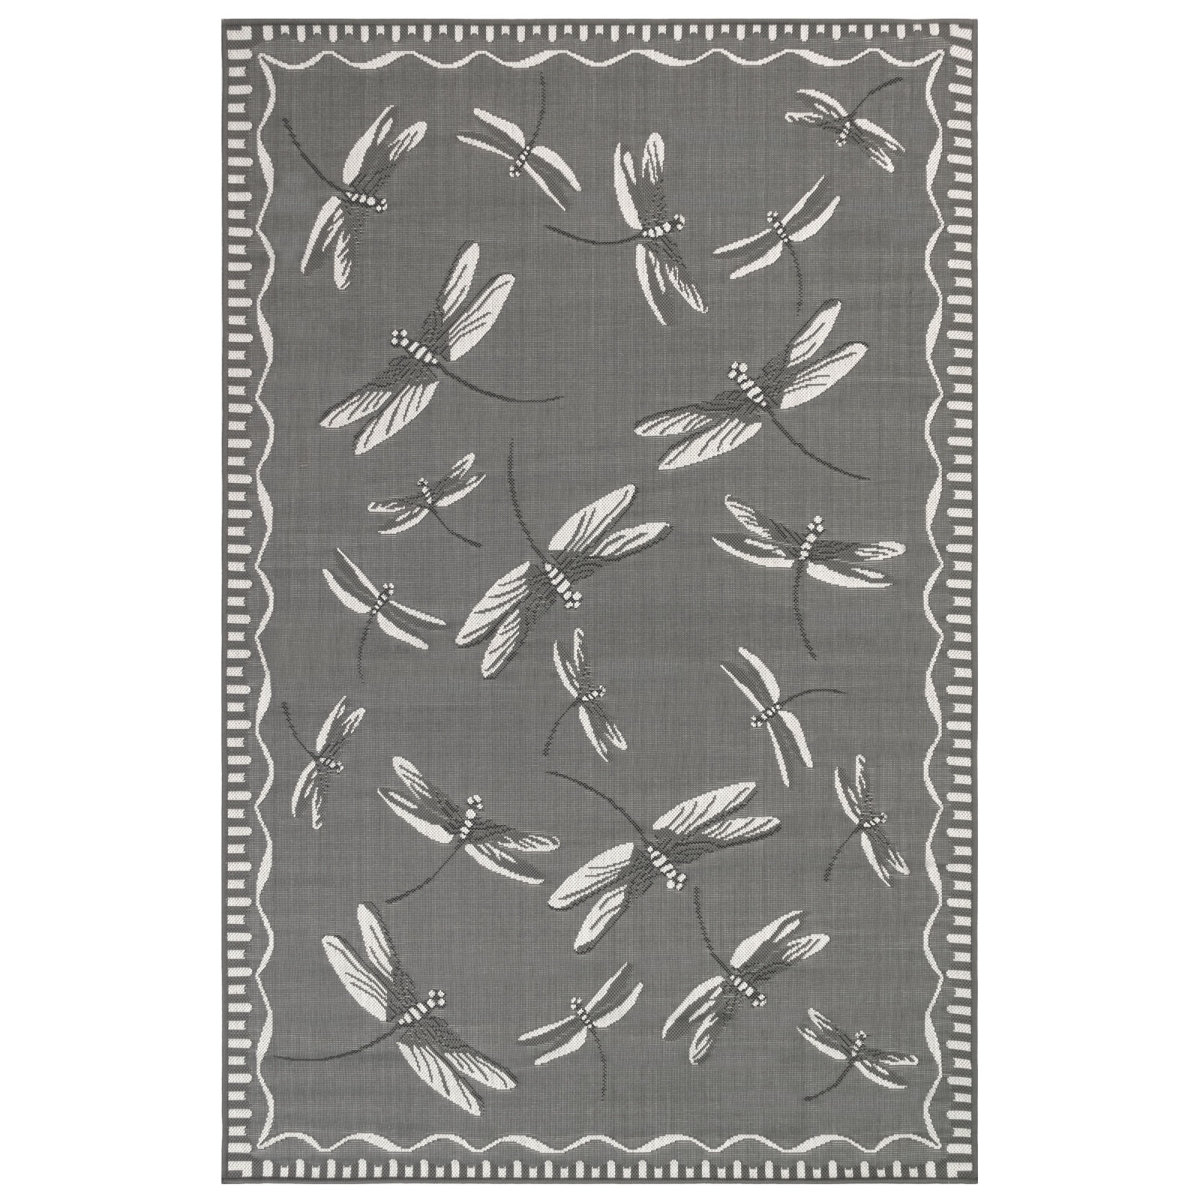 Cre58844097 Liora Manne Carmel Dragonfly Indoor & Outdoor Rug, Grey - 4 Ft. 10 In. X 7 Ft. 6 In.